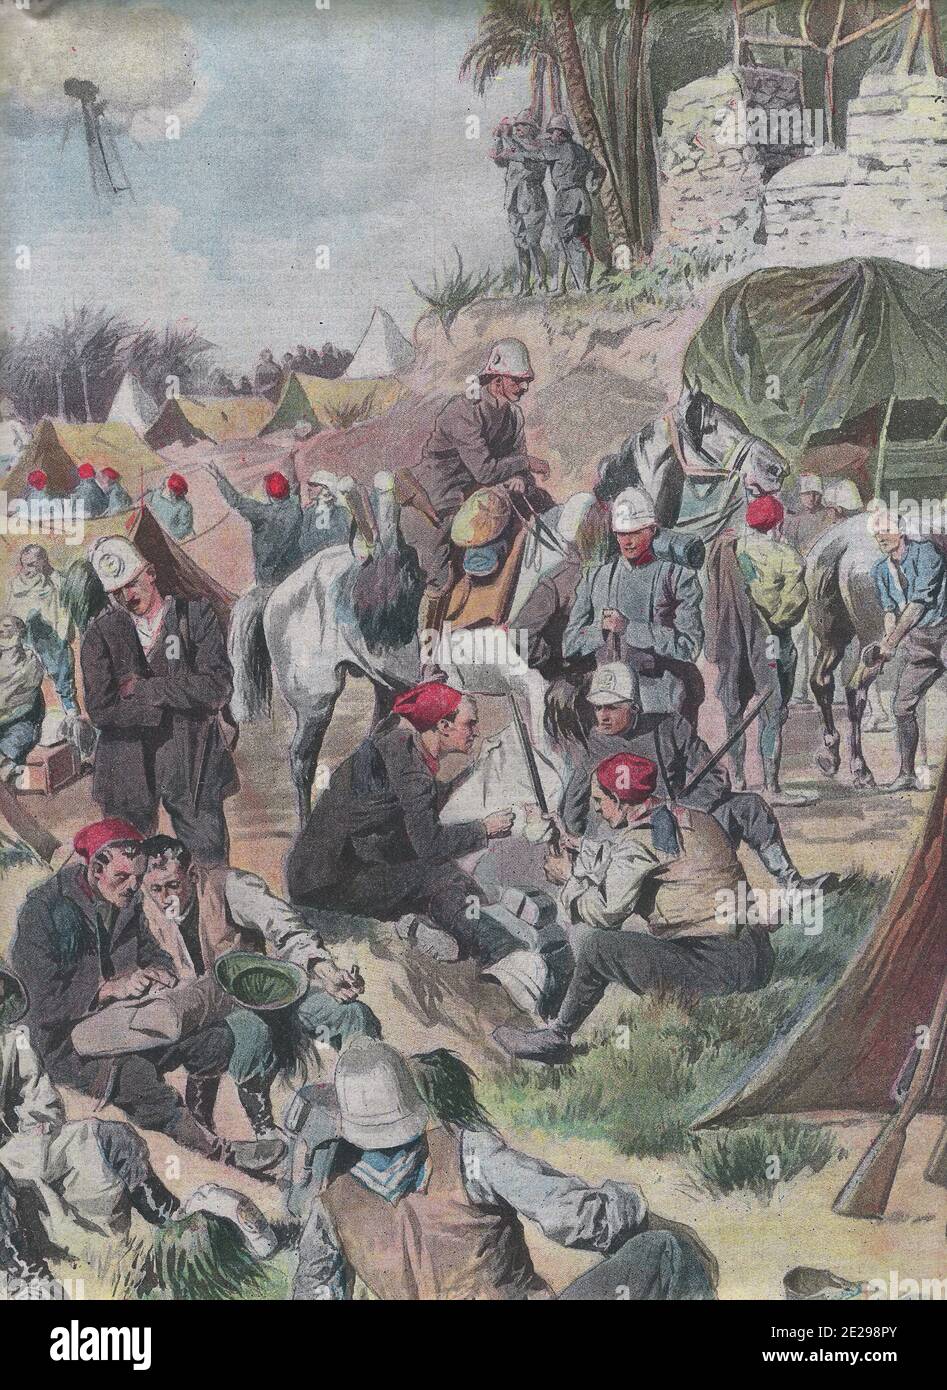 Our Soldiers in Tripoli in the hours of tranquility - Italian illustration, circa 1911 Stock Photo